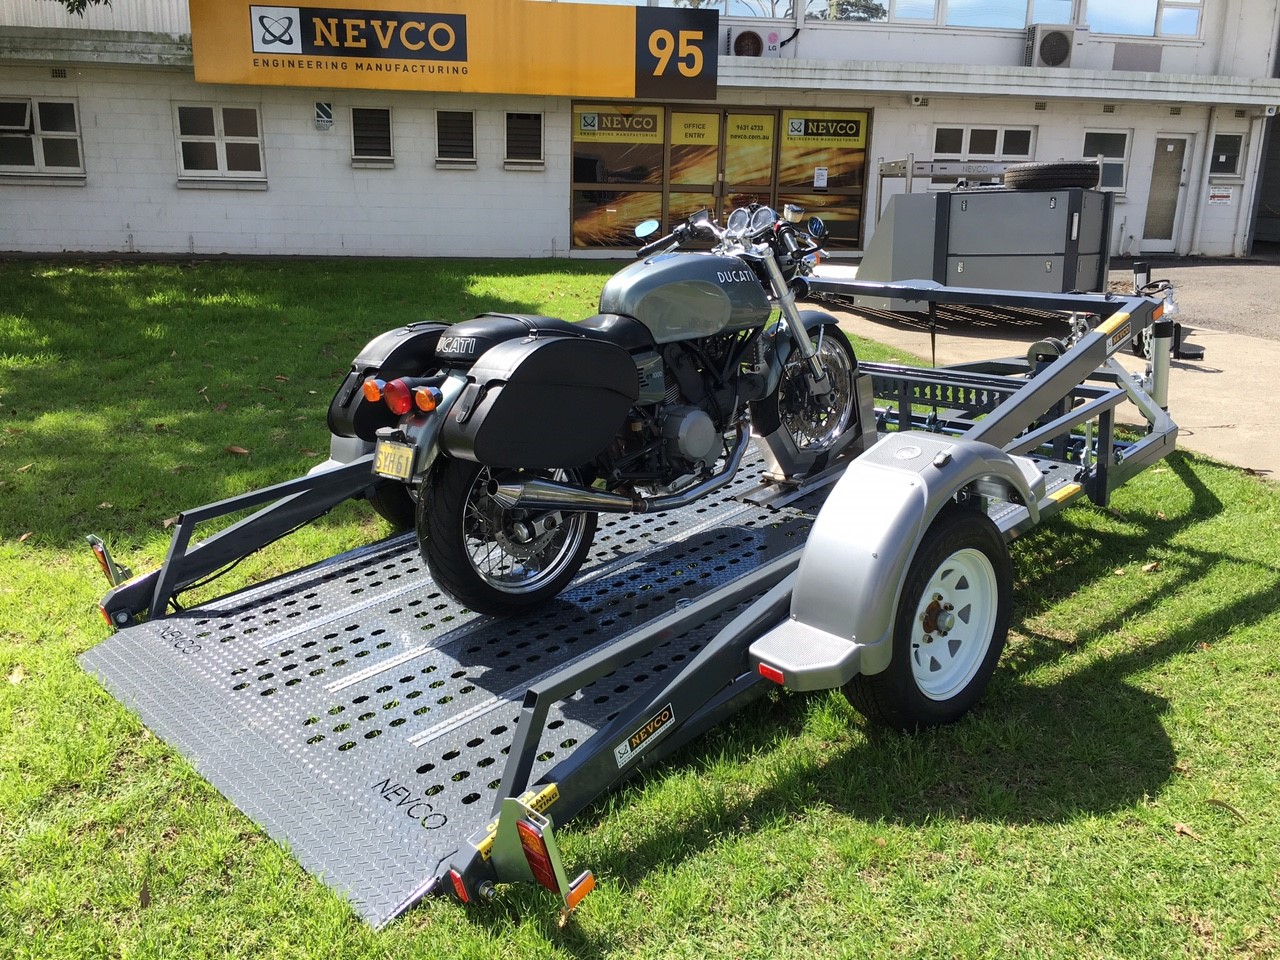 Introducing the latest model in the nevco ground loading trailer range. 